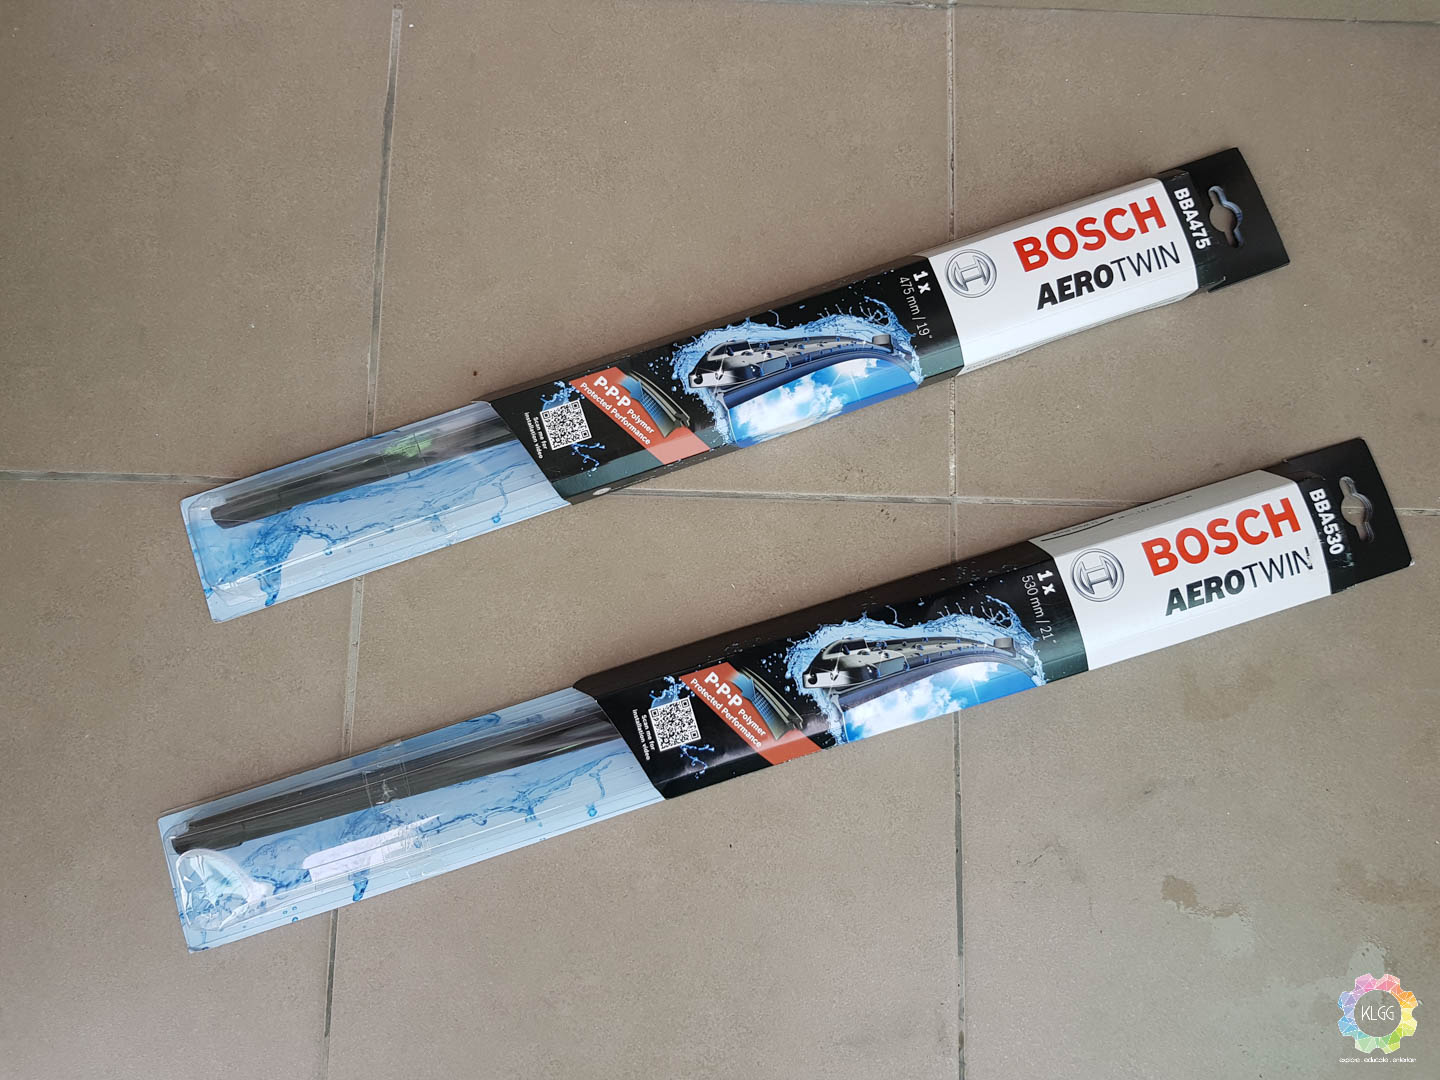 Bosch AeroTwin Wiper Review: Great, Silent Wiping Performance - KLGadgetGuy